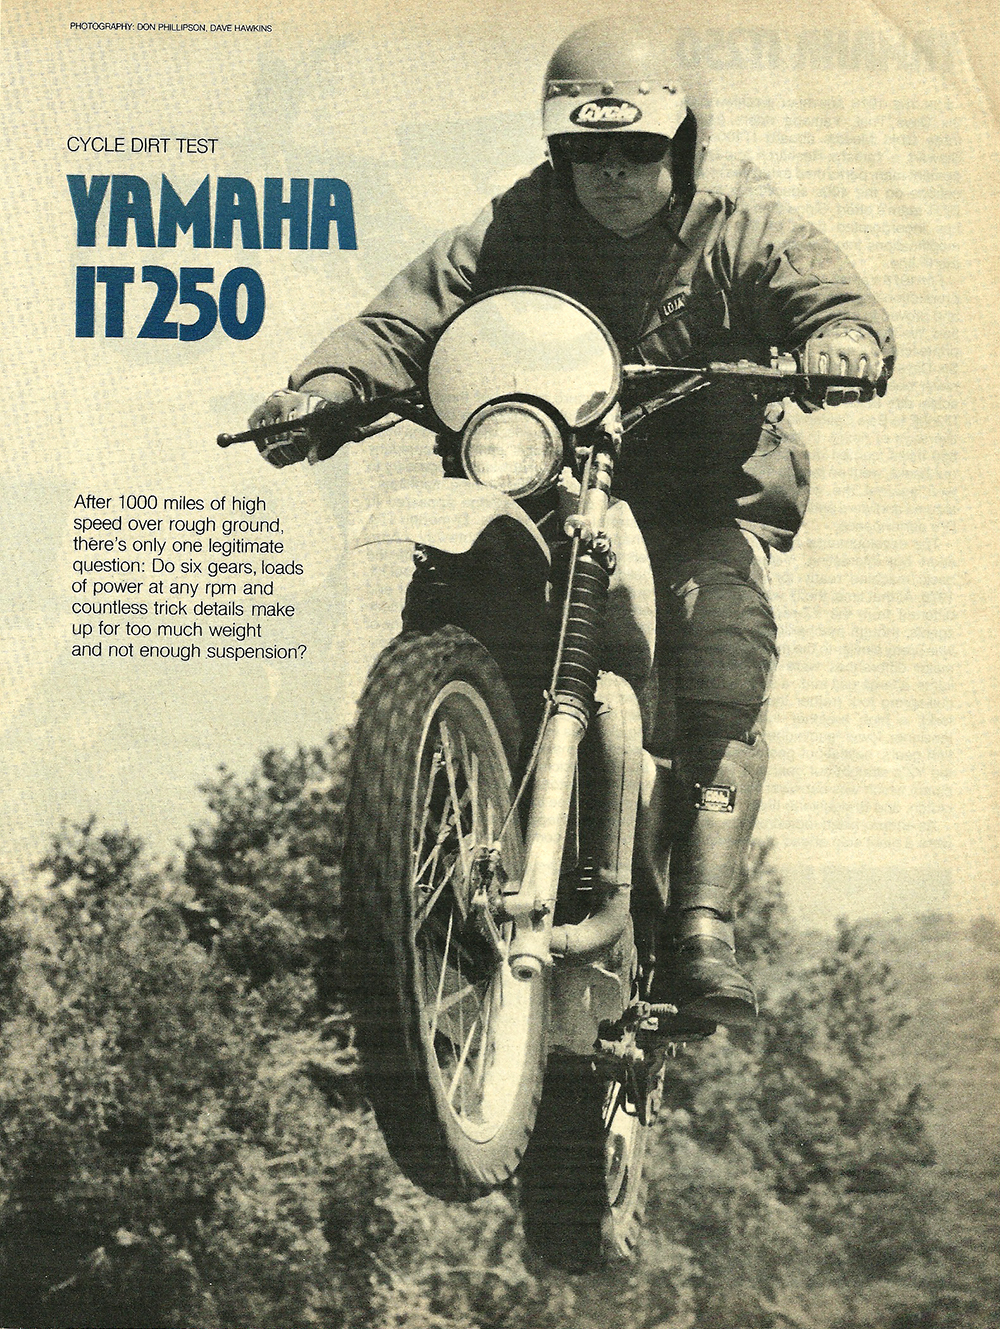 Yamaha IT 250 technical specifications